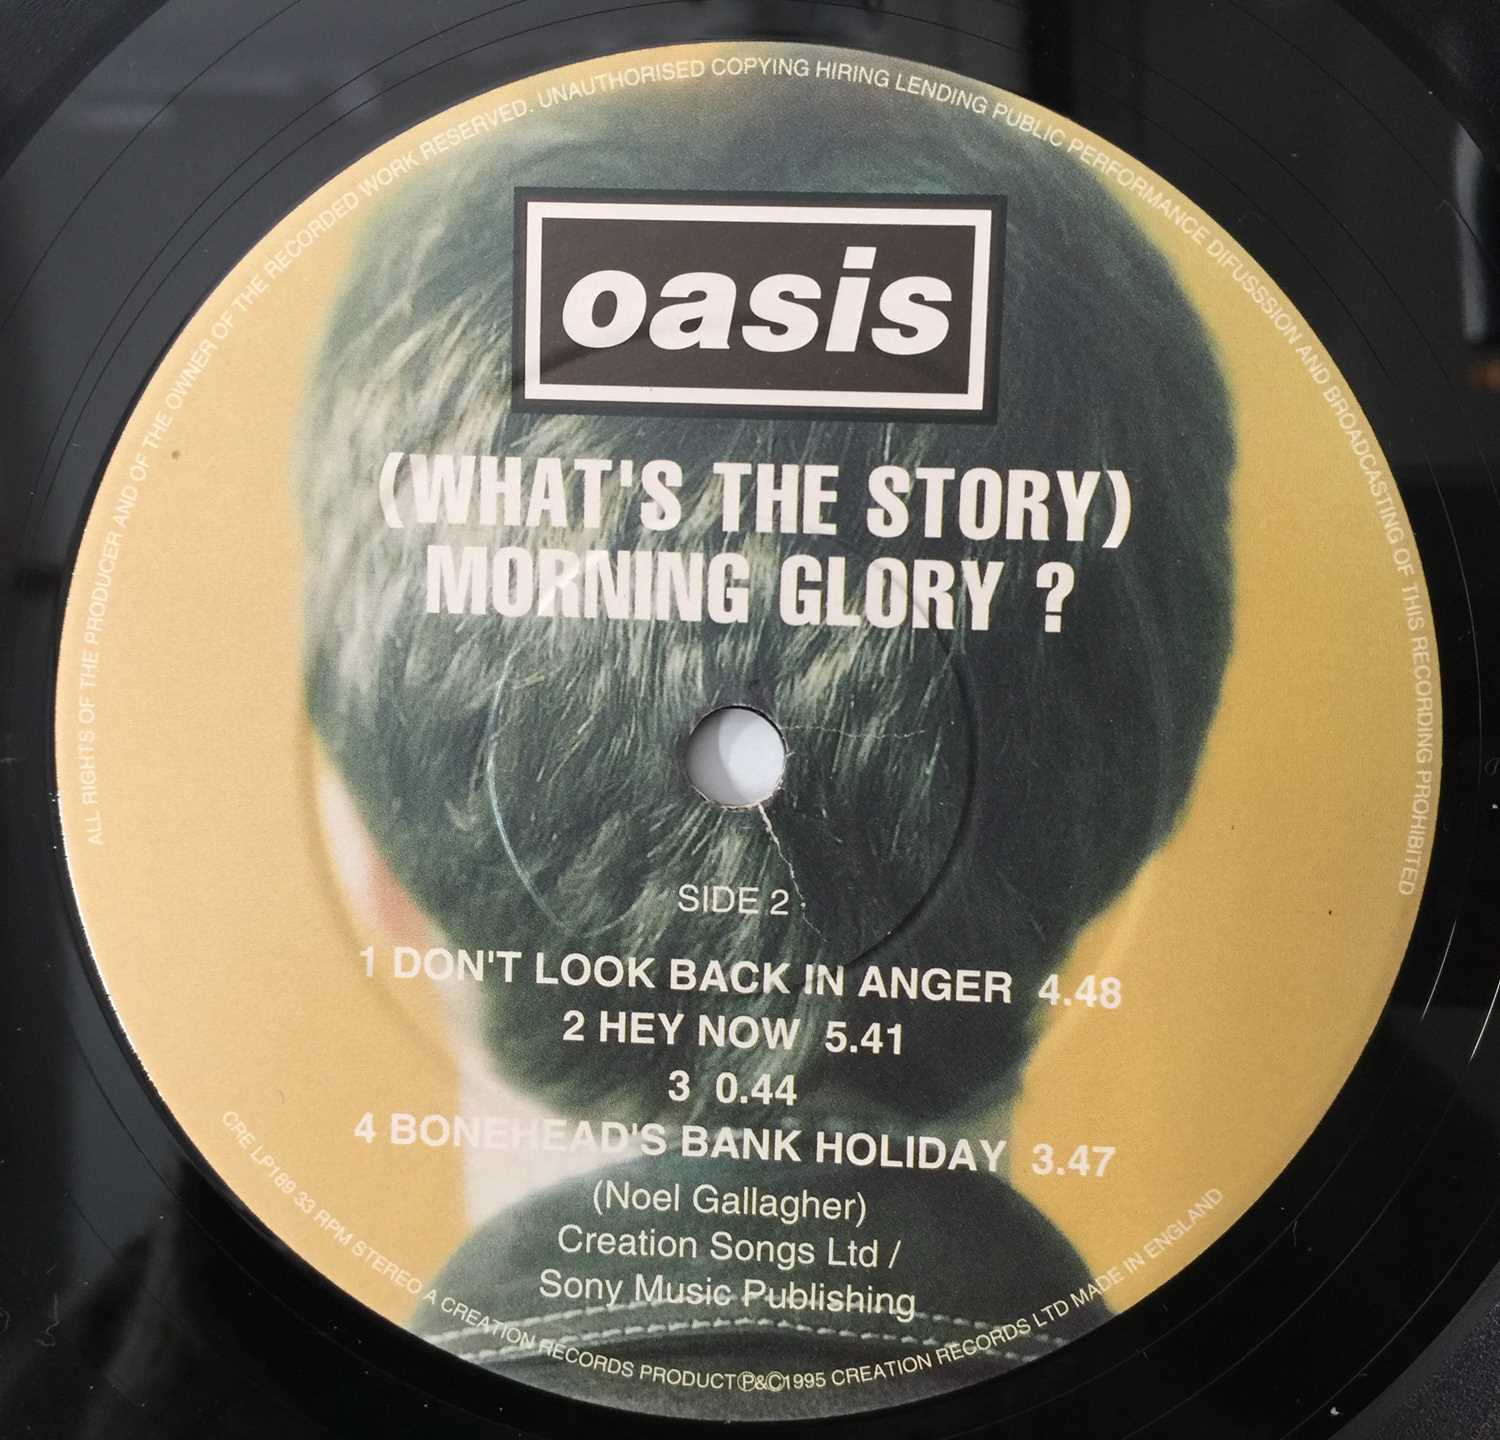 OASIS - (WHAT'S THE STORY) MORNING GLORY? LP (ORIGINAL UK COPY - CREATION CRE LP 189) - Image 6 of 7